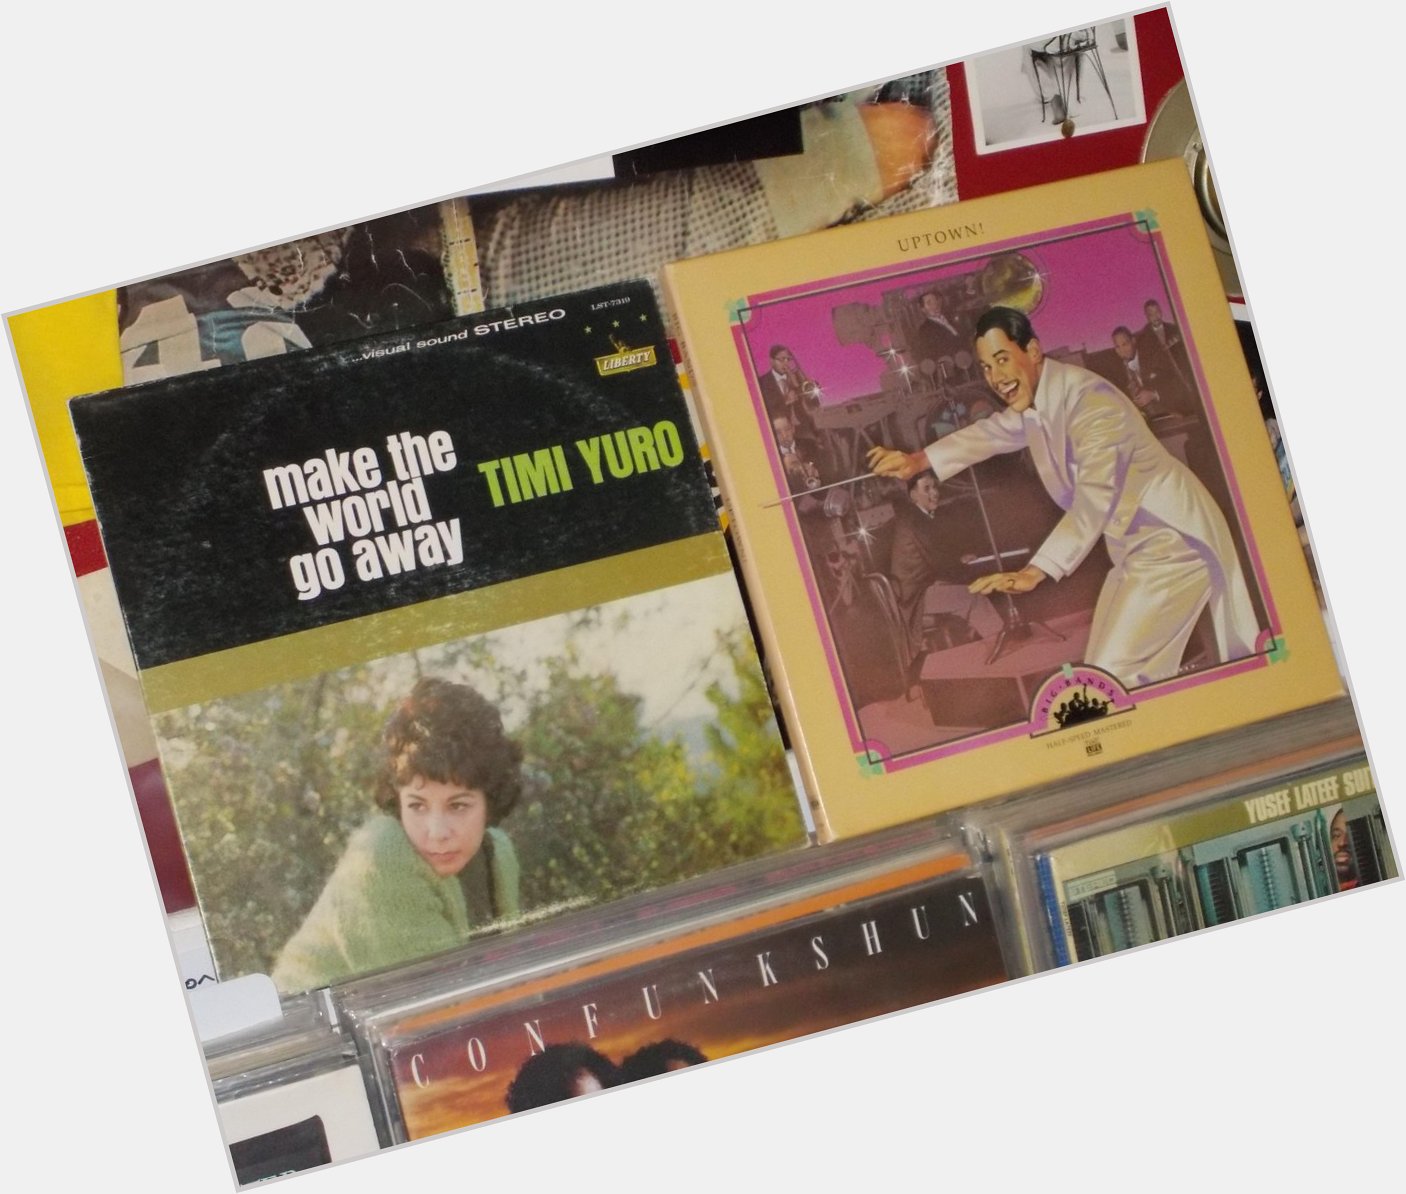 Happy Birthday to the late Timi Yuro & the late Louis Armstrong, who\s on this compilation 